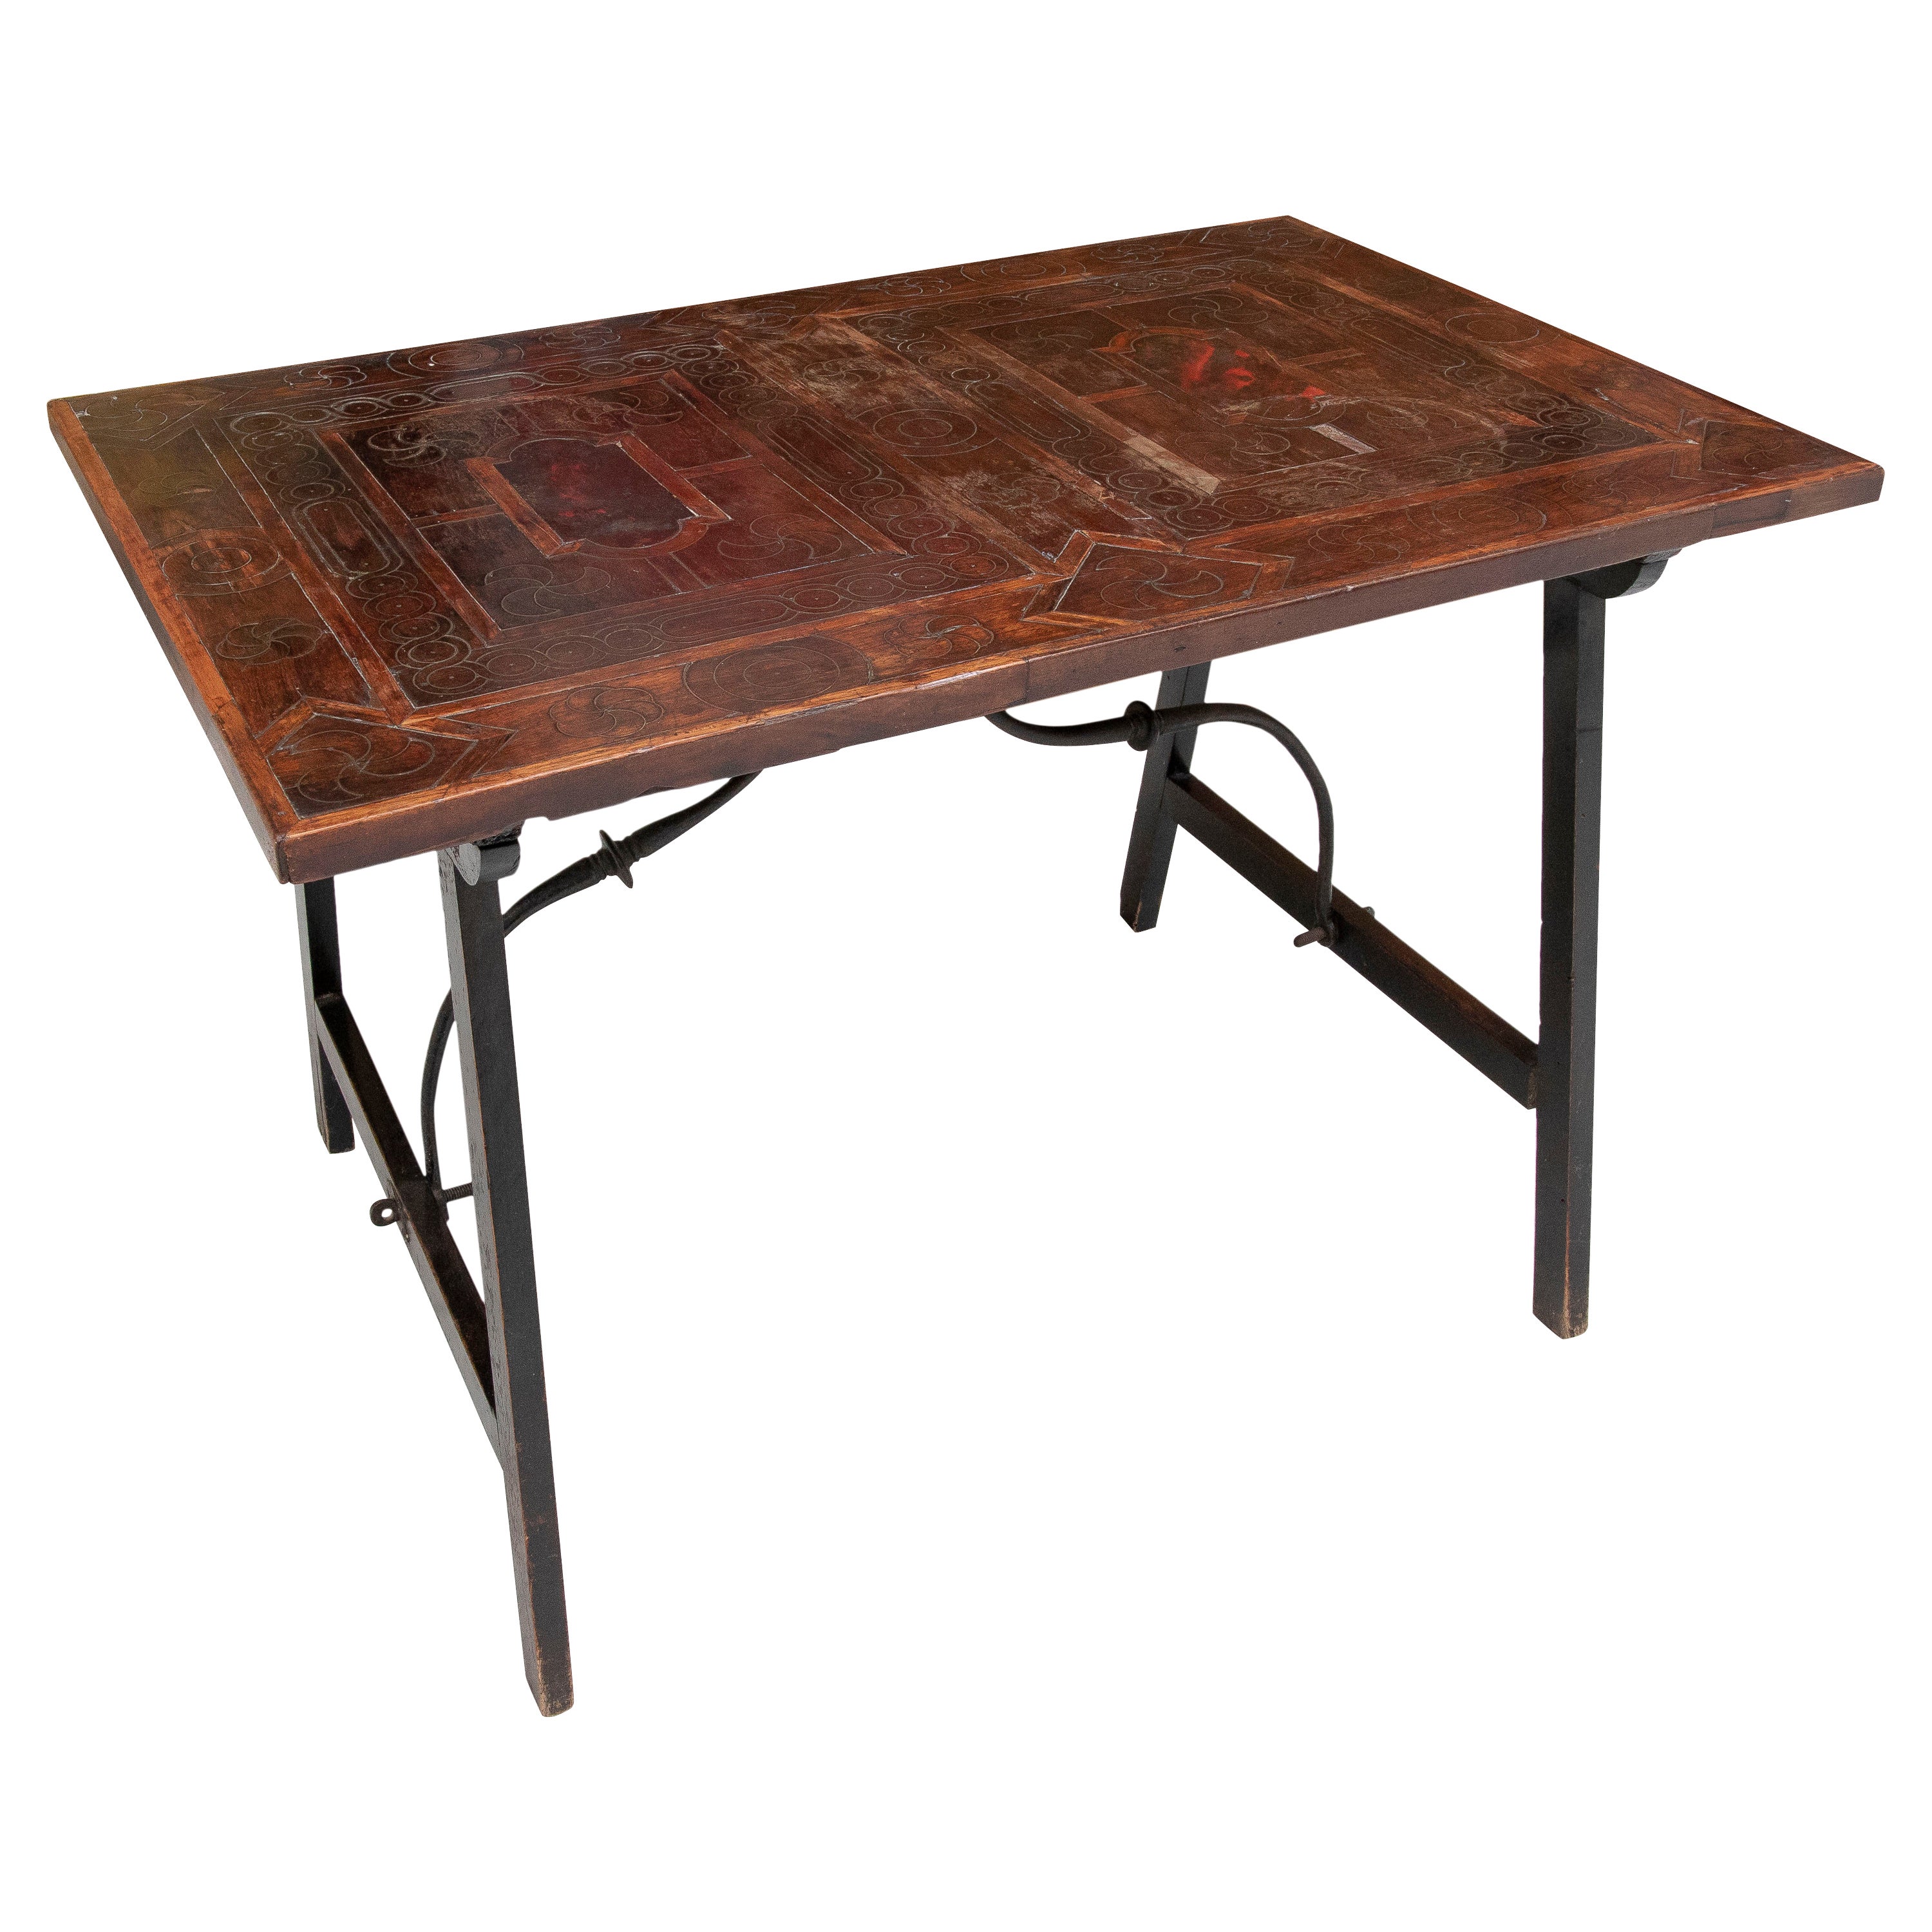 17th Century Spanish Wooden Table with Inlays